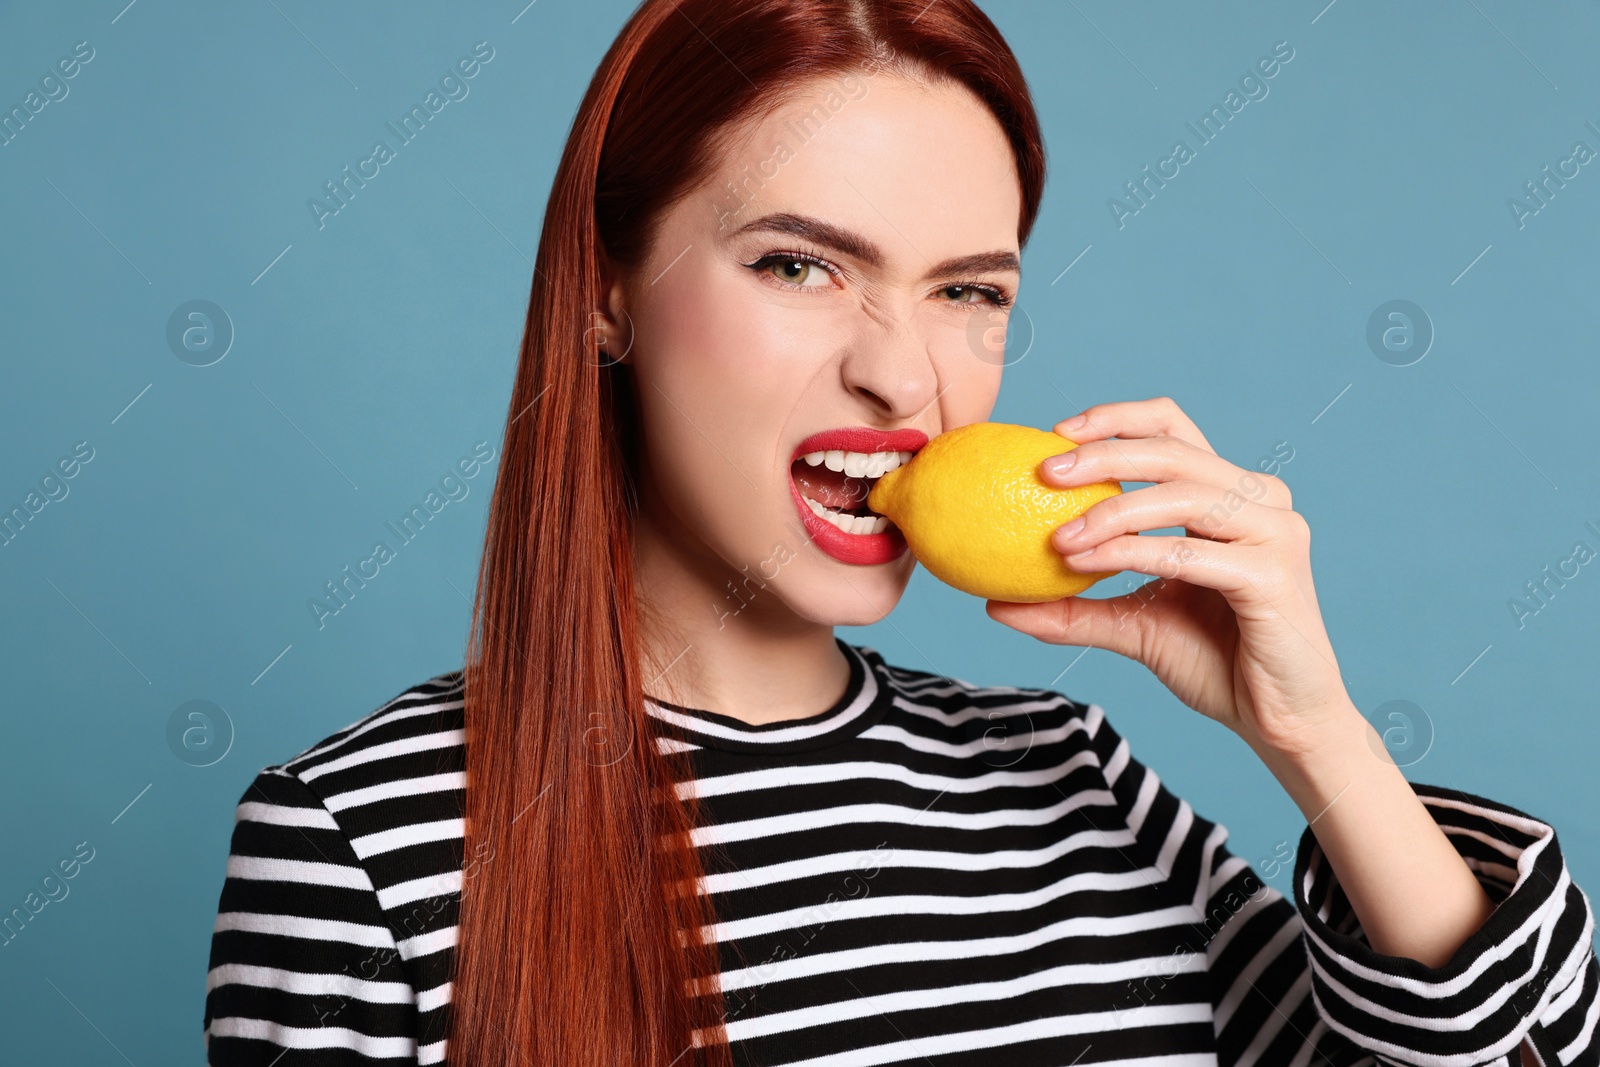 Photo of Woman with red dyed hair biting whole lemon on light blue background